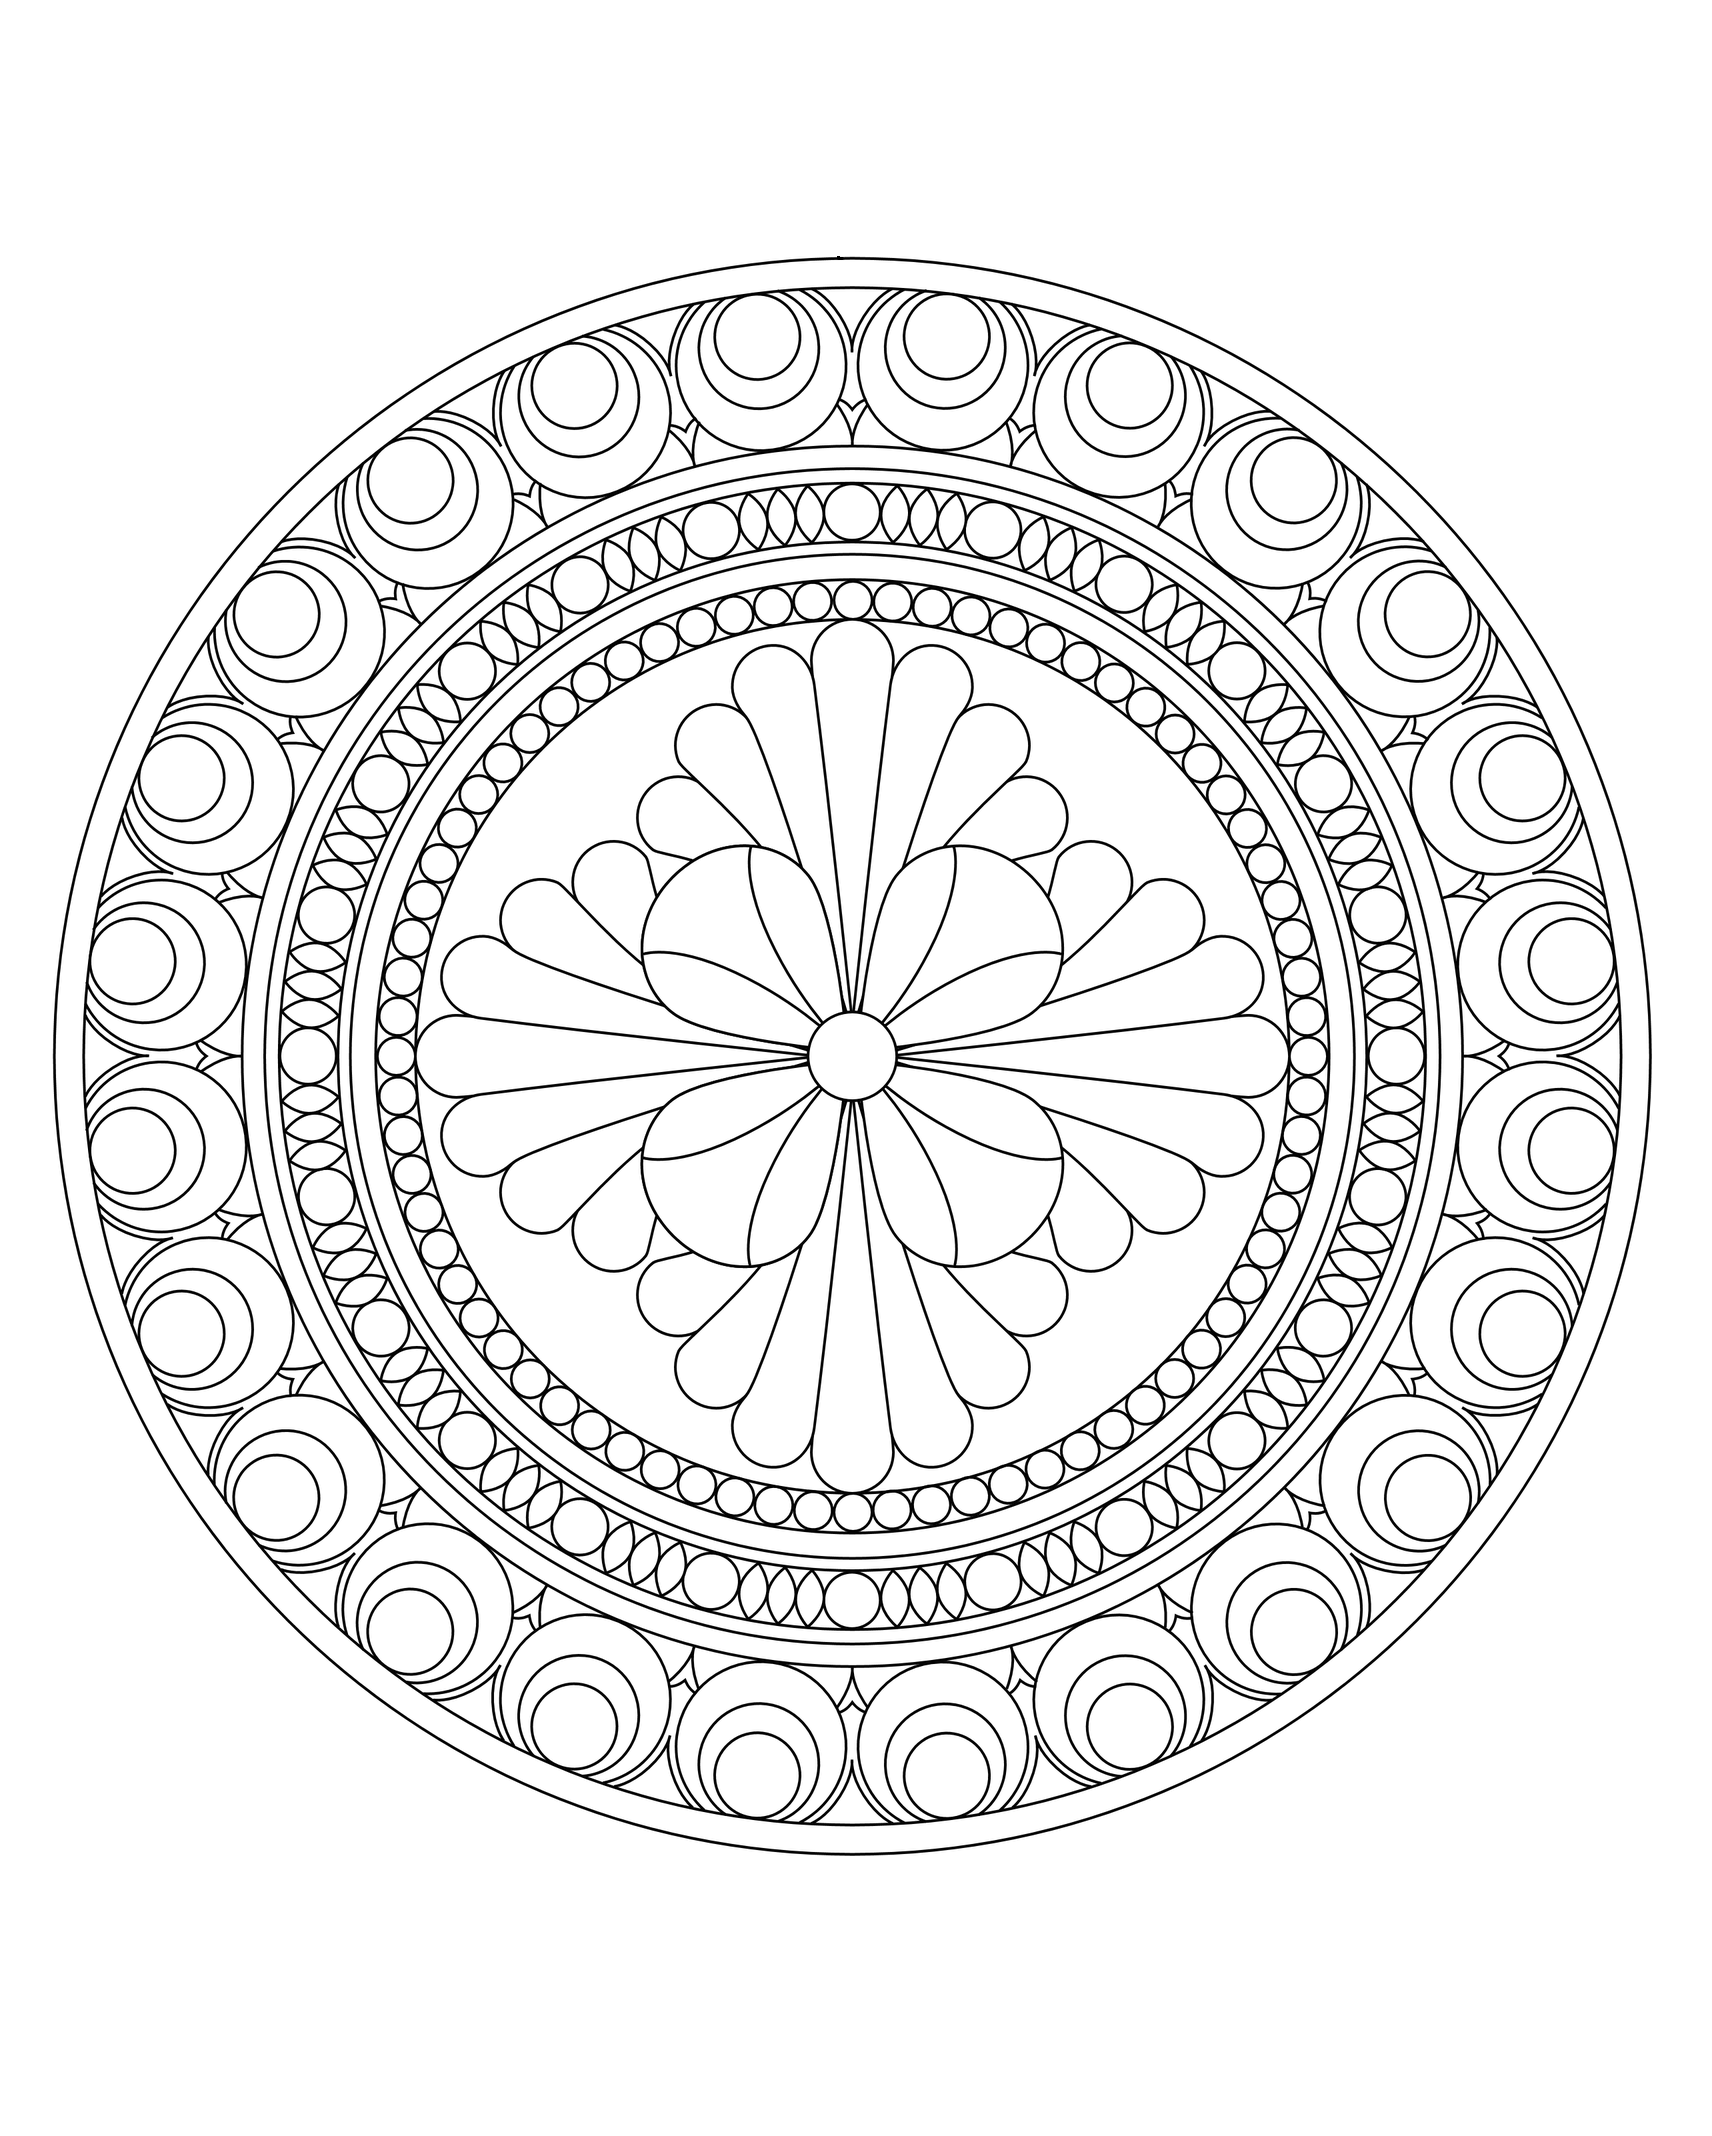 pattern coloring pages